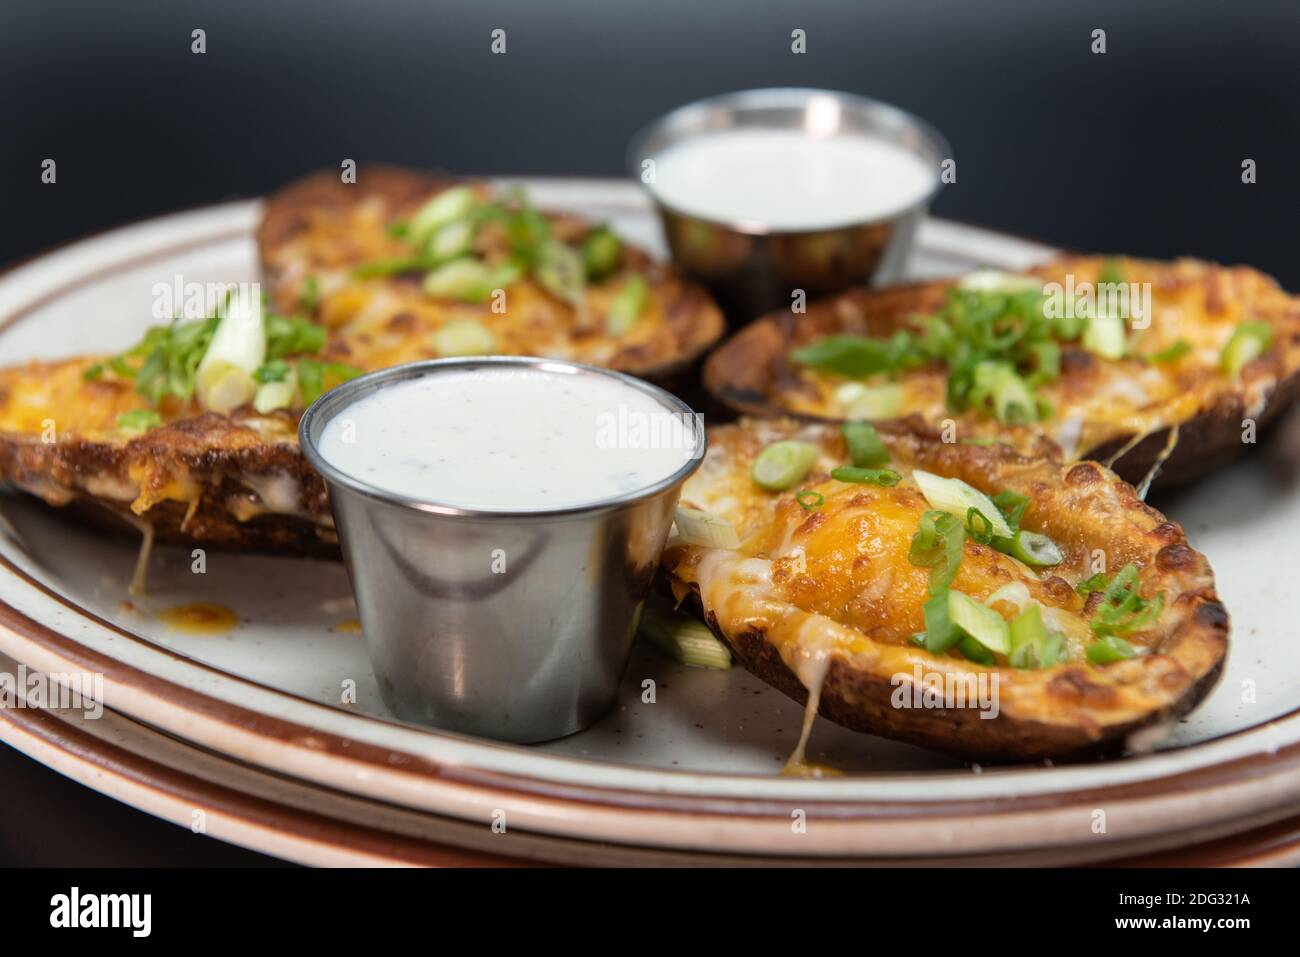 Side dish appetizer of steak stuffed potato skins served on a plate with sour cream dipping sauce. Stock Photo